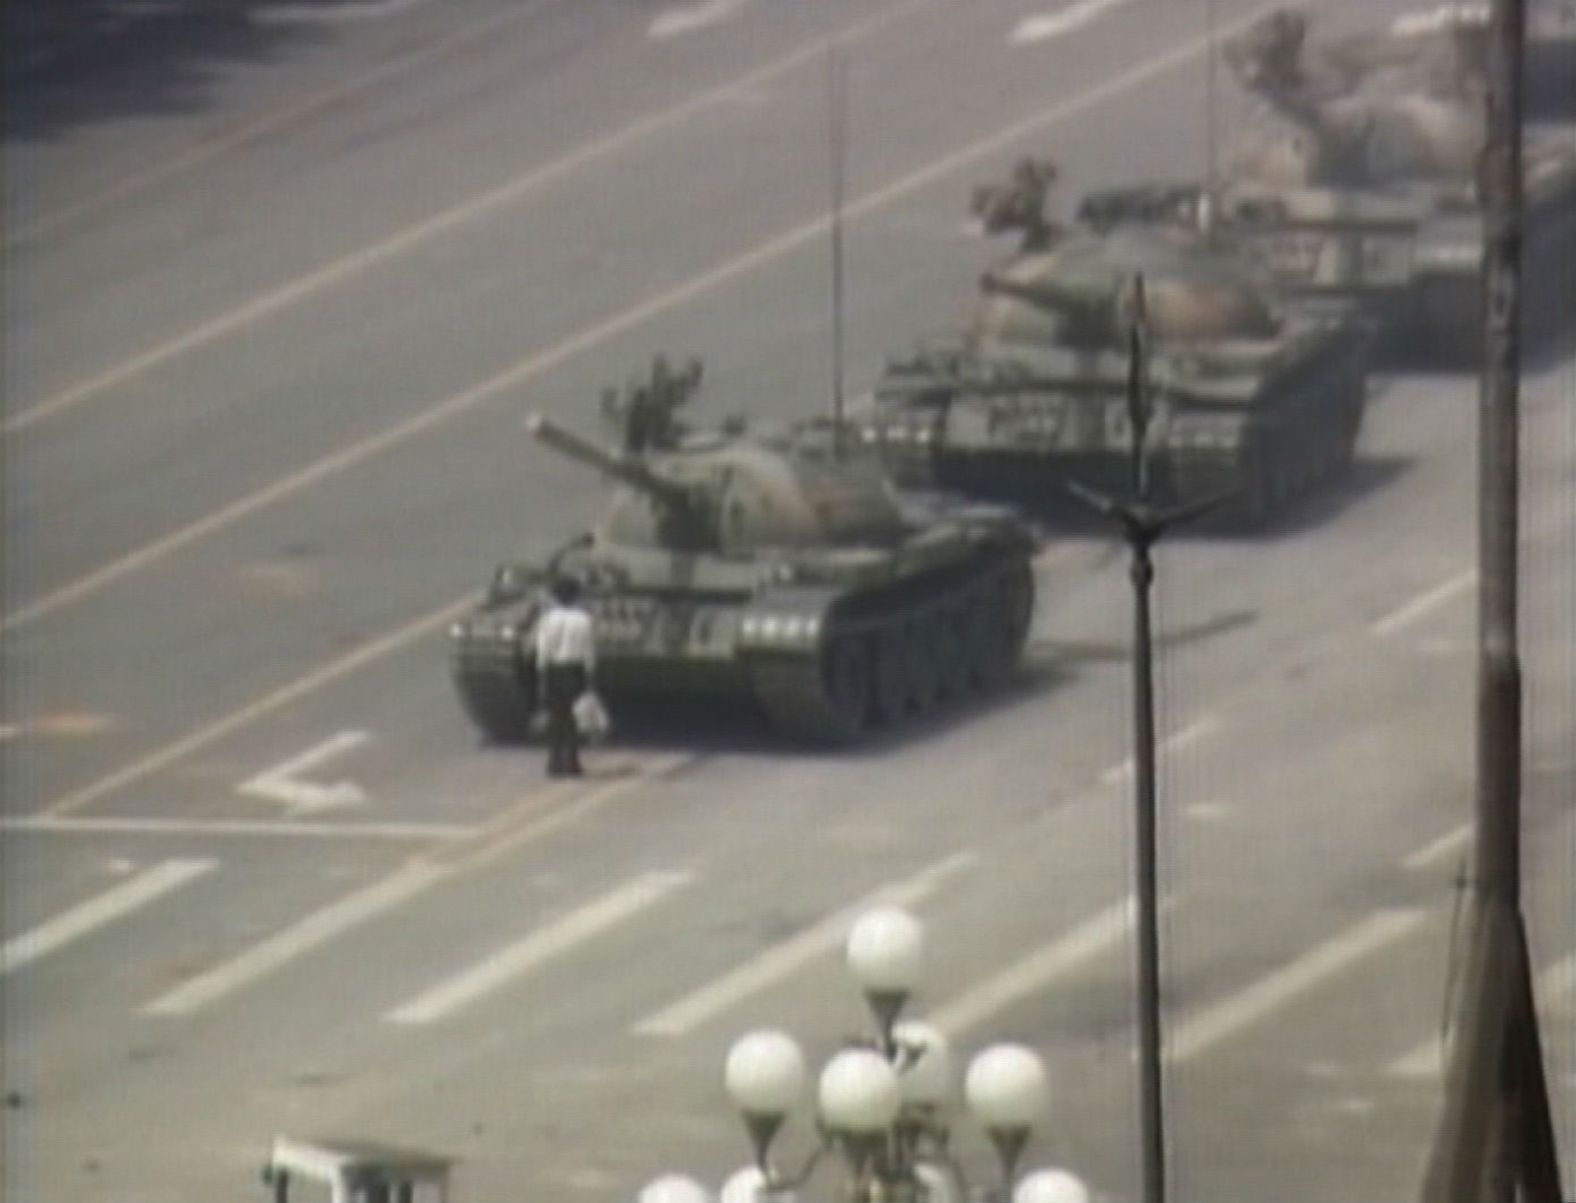 CNN photojournalist Jonathan Schaer covered the 1989 Tiananmen Square protests and was one of the few people to capture the iconic "tank man" standoff.